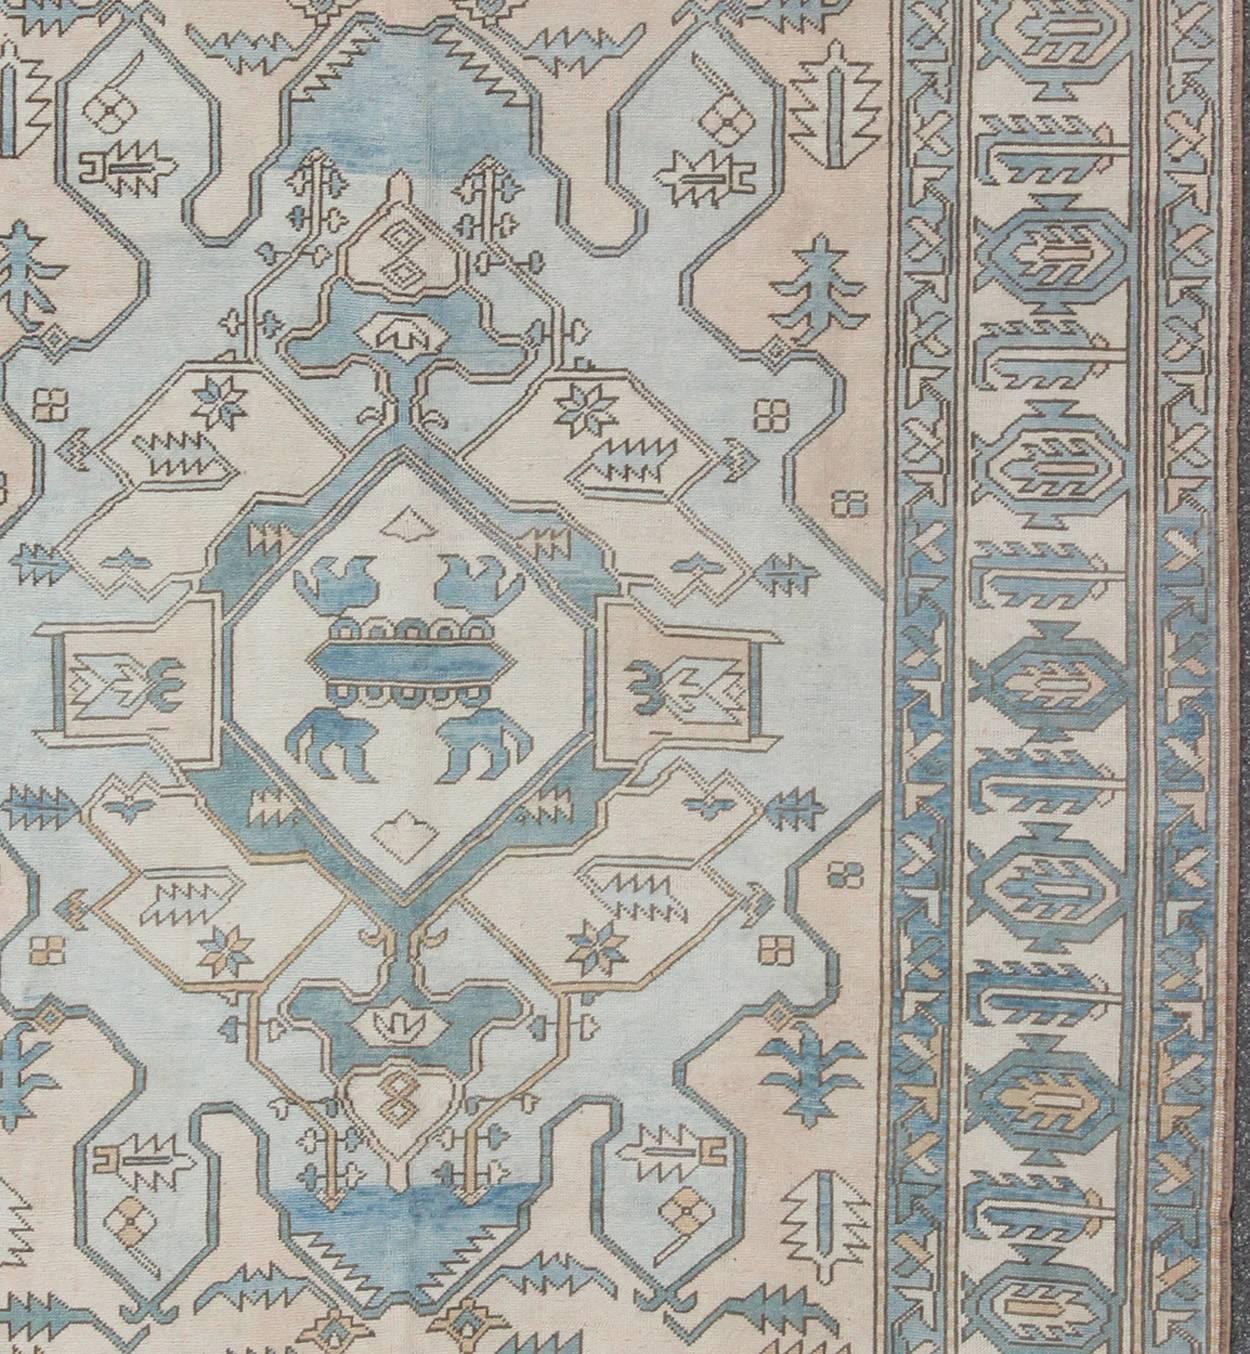 Hand-Knotted Vintage Oushak Rug from Turkey with Medallion in Shades of Blue, Cream and Nude